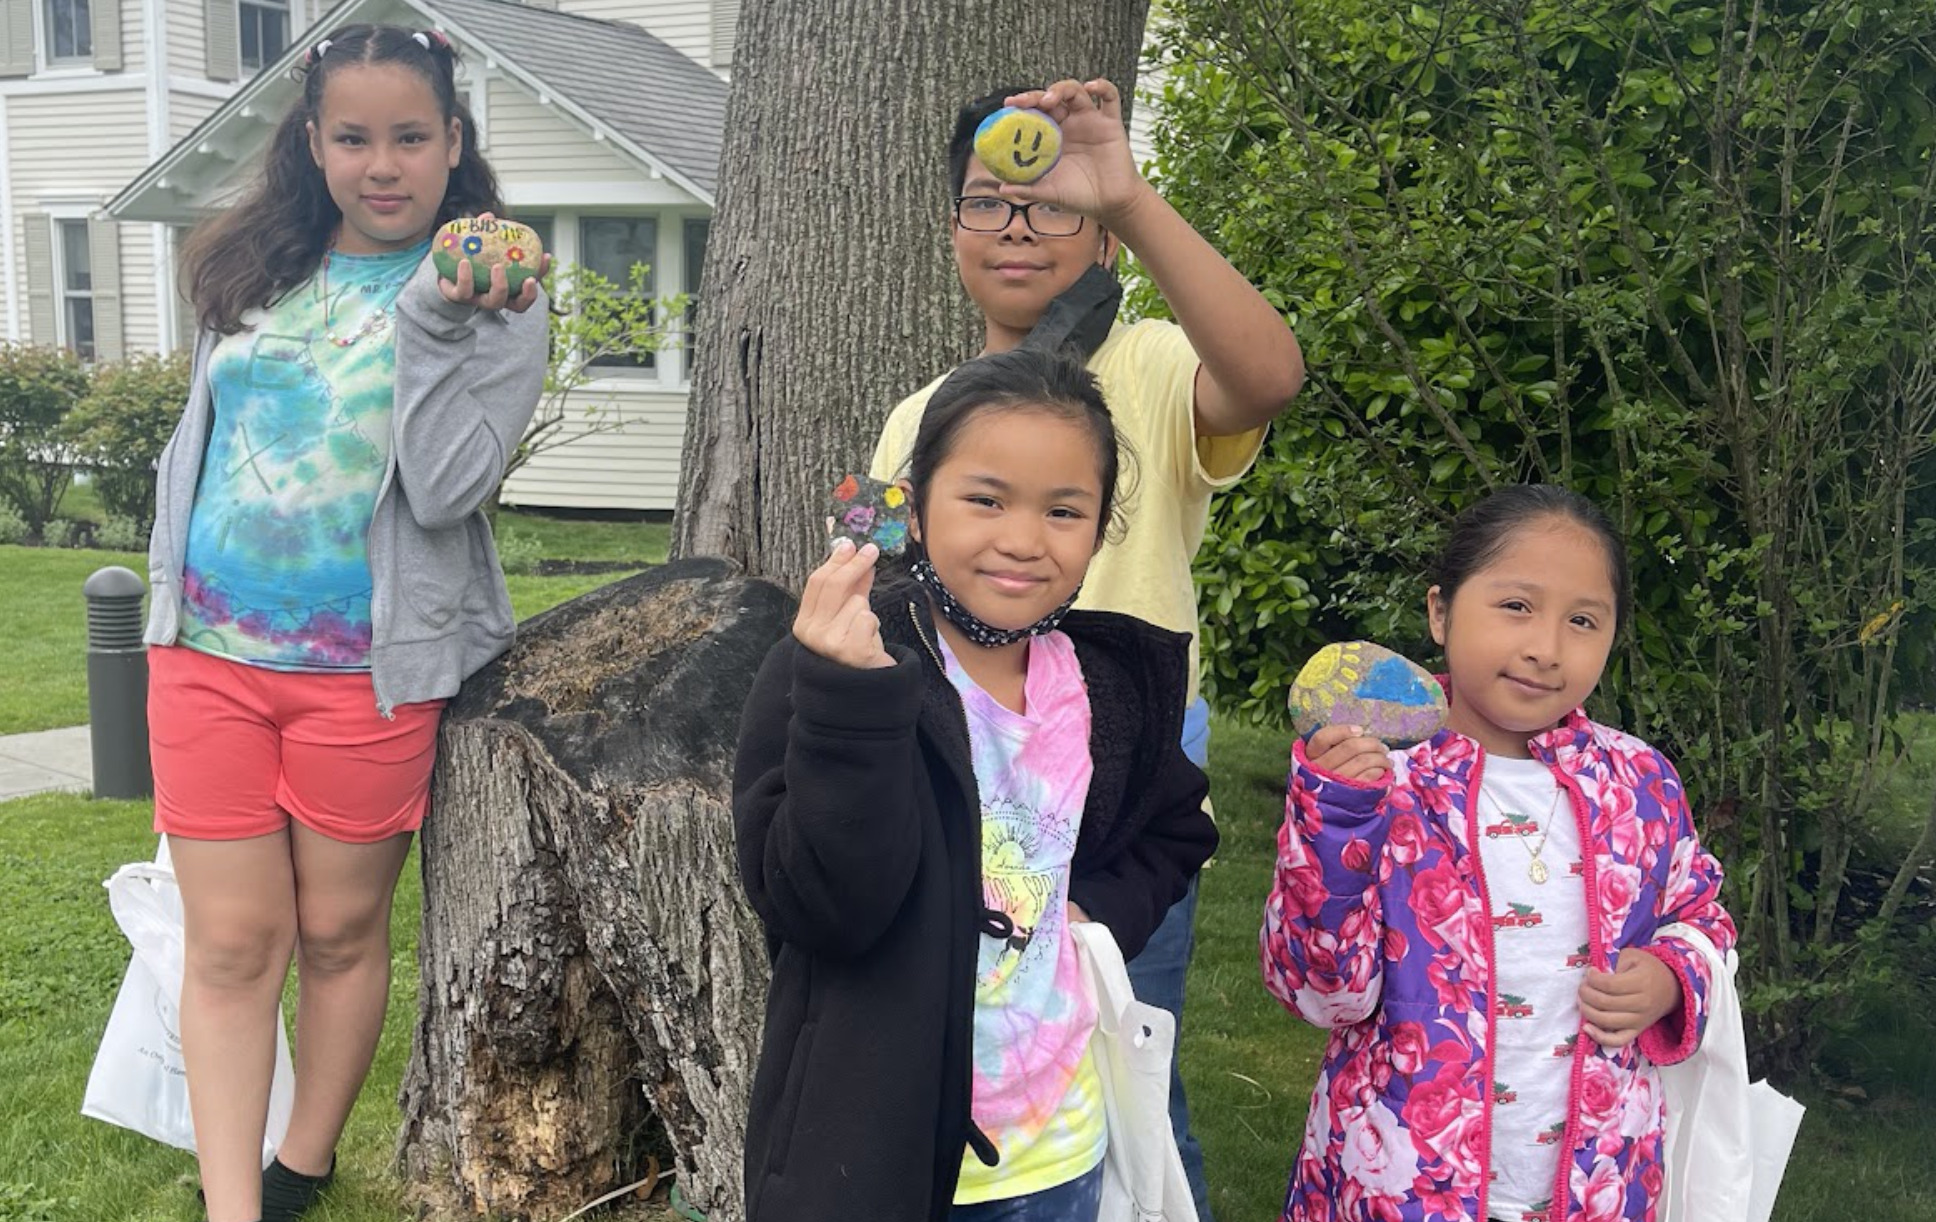 Bridgehampton School students, from left, Arianna Verzosa, Jeffrey Soto, Ashli Reyes and Asucena Ramos with their Scribble Stones, which they made after reading Diane Alber’s “Scribble Stones,” a heartwarming story about a little stone that was able to spread kindness to the world. Inspired by the story, they decorated stones with positive pictures and kind messages to place around the Bridgehampton community on a walking field trip. Students
carefully selected spots through hamlet where they thought their joyful stones would be seen by the most people and spread the most happiness. COURTESY BRIDGDEHAMPTON SCHOOL DISTRICT